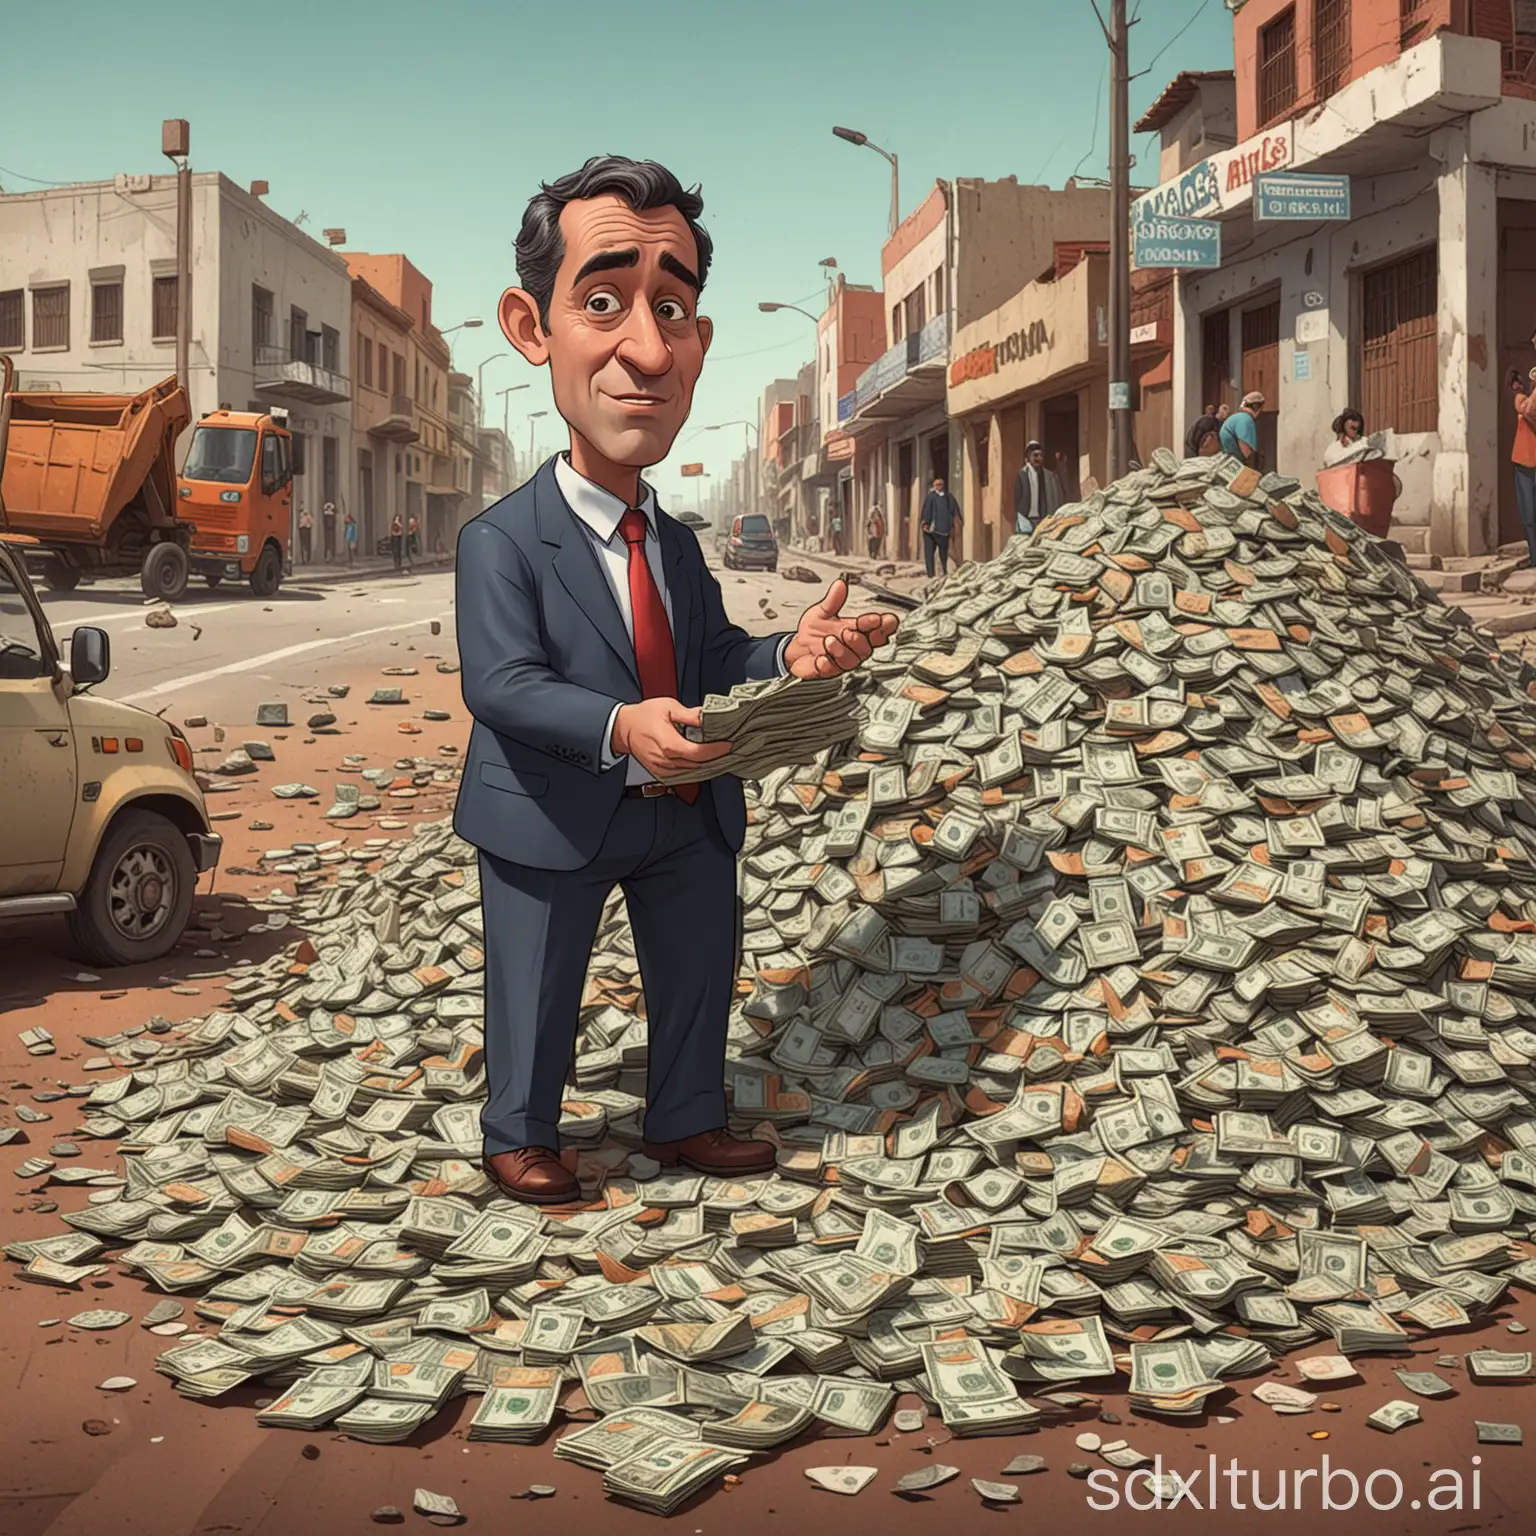 A gif of someone counting a large pile of money, with the caption "Mayor Fonseca counting the money destined for the infrastructure of Oriximiná", followed by a scene of a street full of potholes.
Cartoon Style
